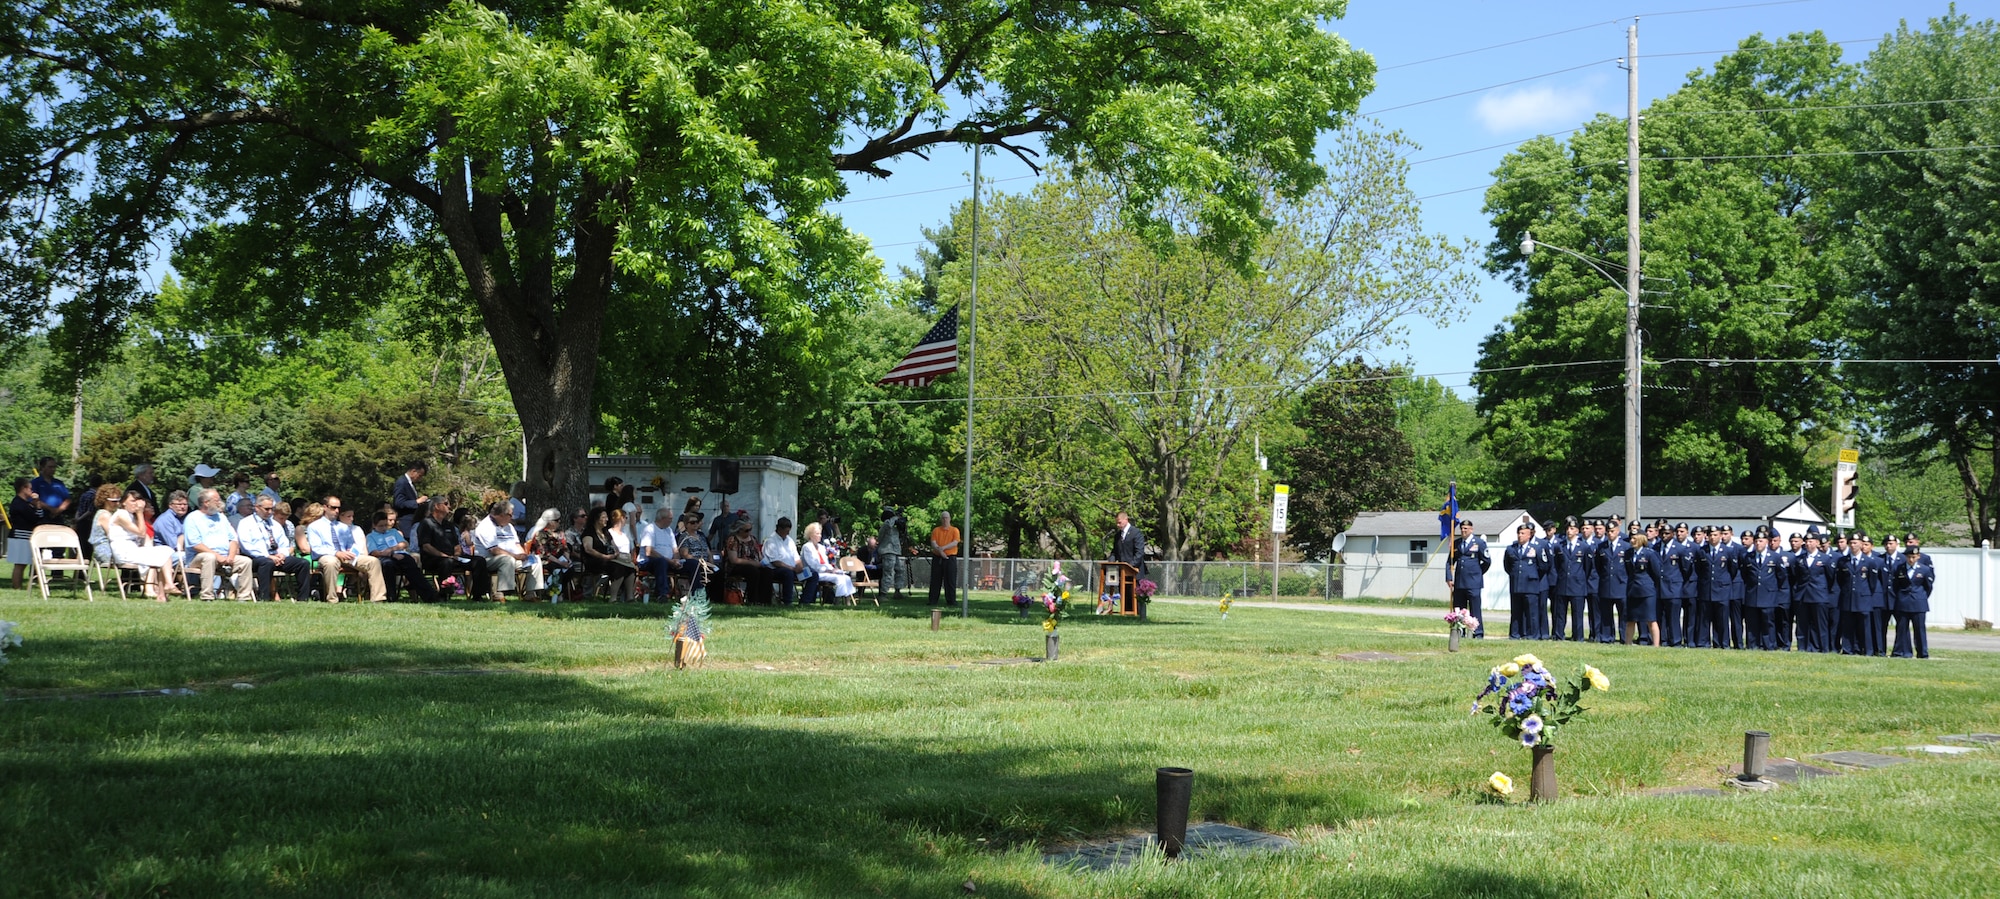 Family, community members and Airmen from Whiteman Air Force Base attend the 25th annual wreath-laying ceremony for 2nd Lt. George Whiteman May 18, 2013, in Sedalia, Mo. The base was renamed in Whiteman’s honor 14 years after he became one of the first Airmen to die during World War II. (U.S. Air Force photo by Senior Airman Brigitte N. Brantley/Released)